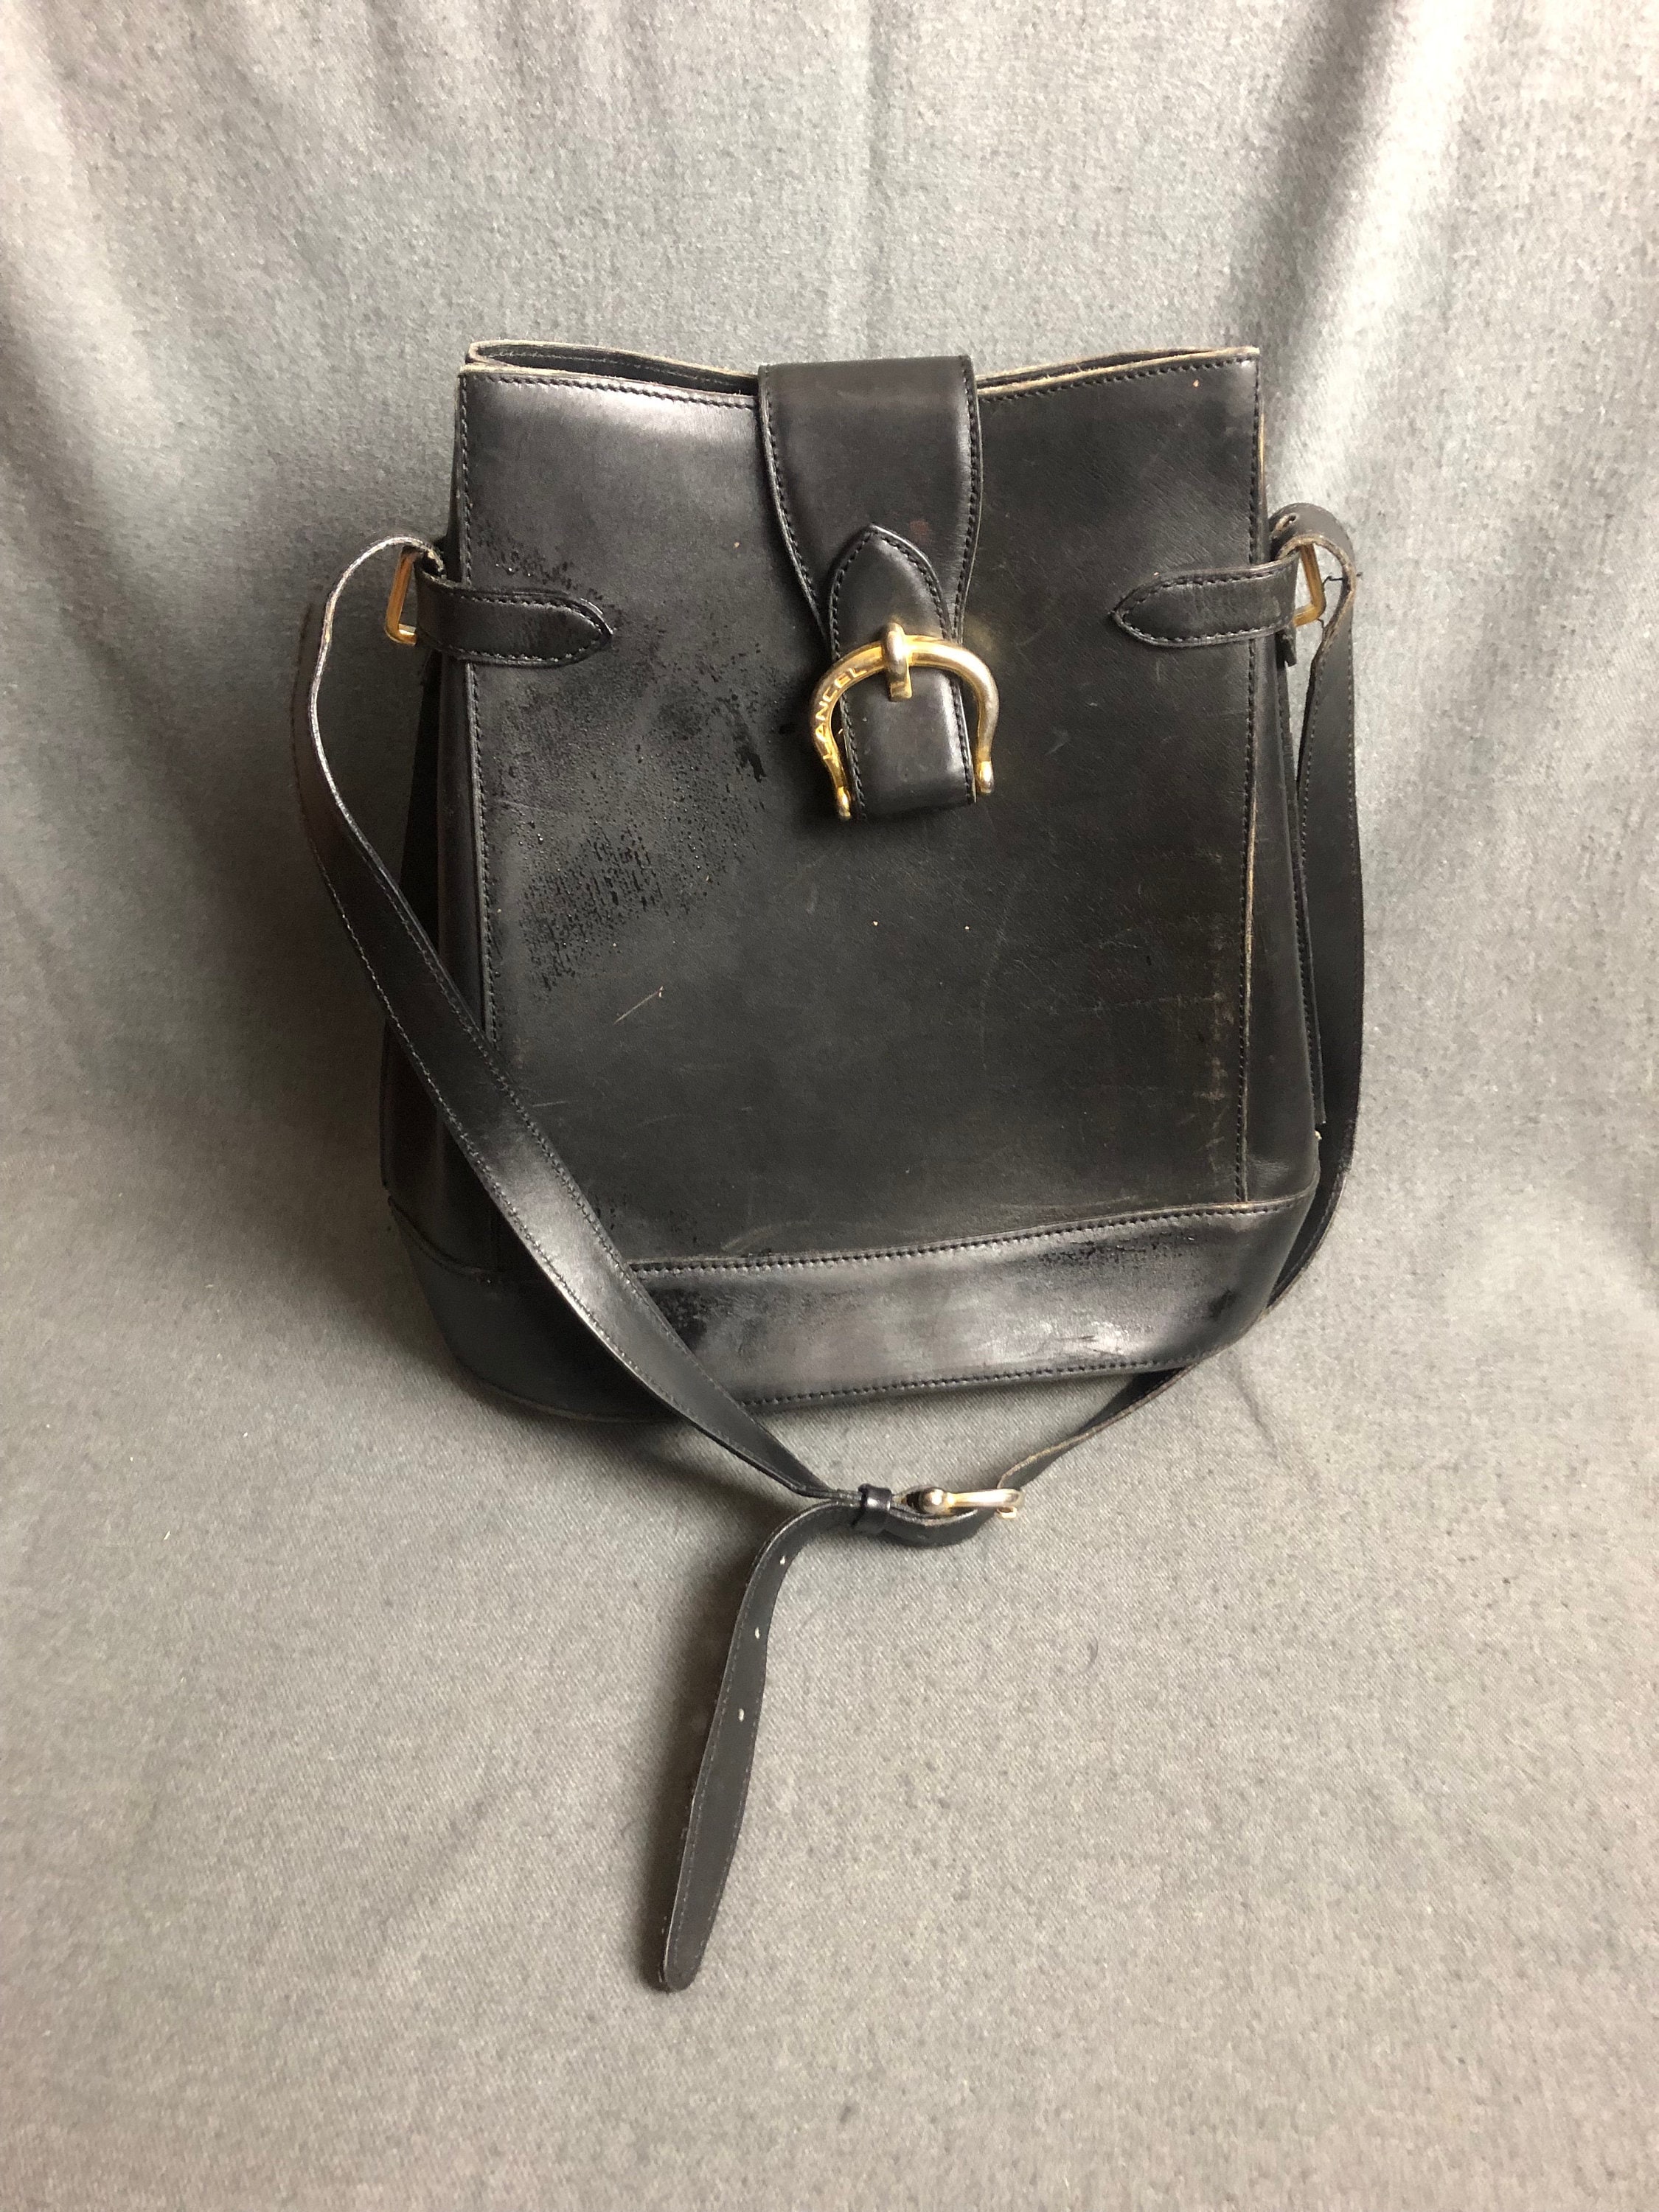 Found 18 results for bonia handbag, Buy, Sell, Find or Rent